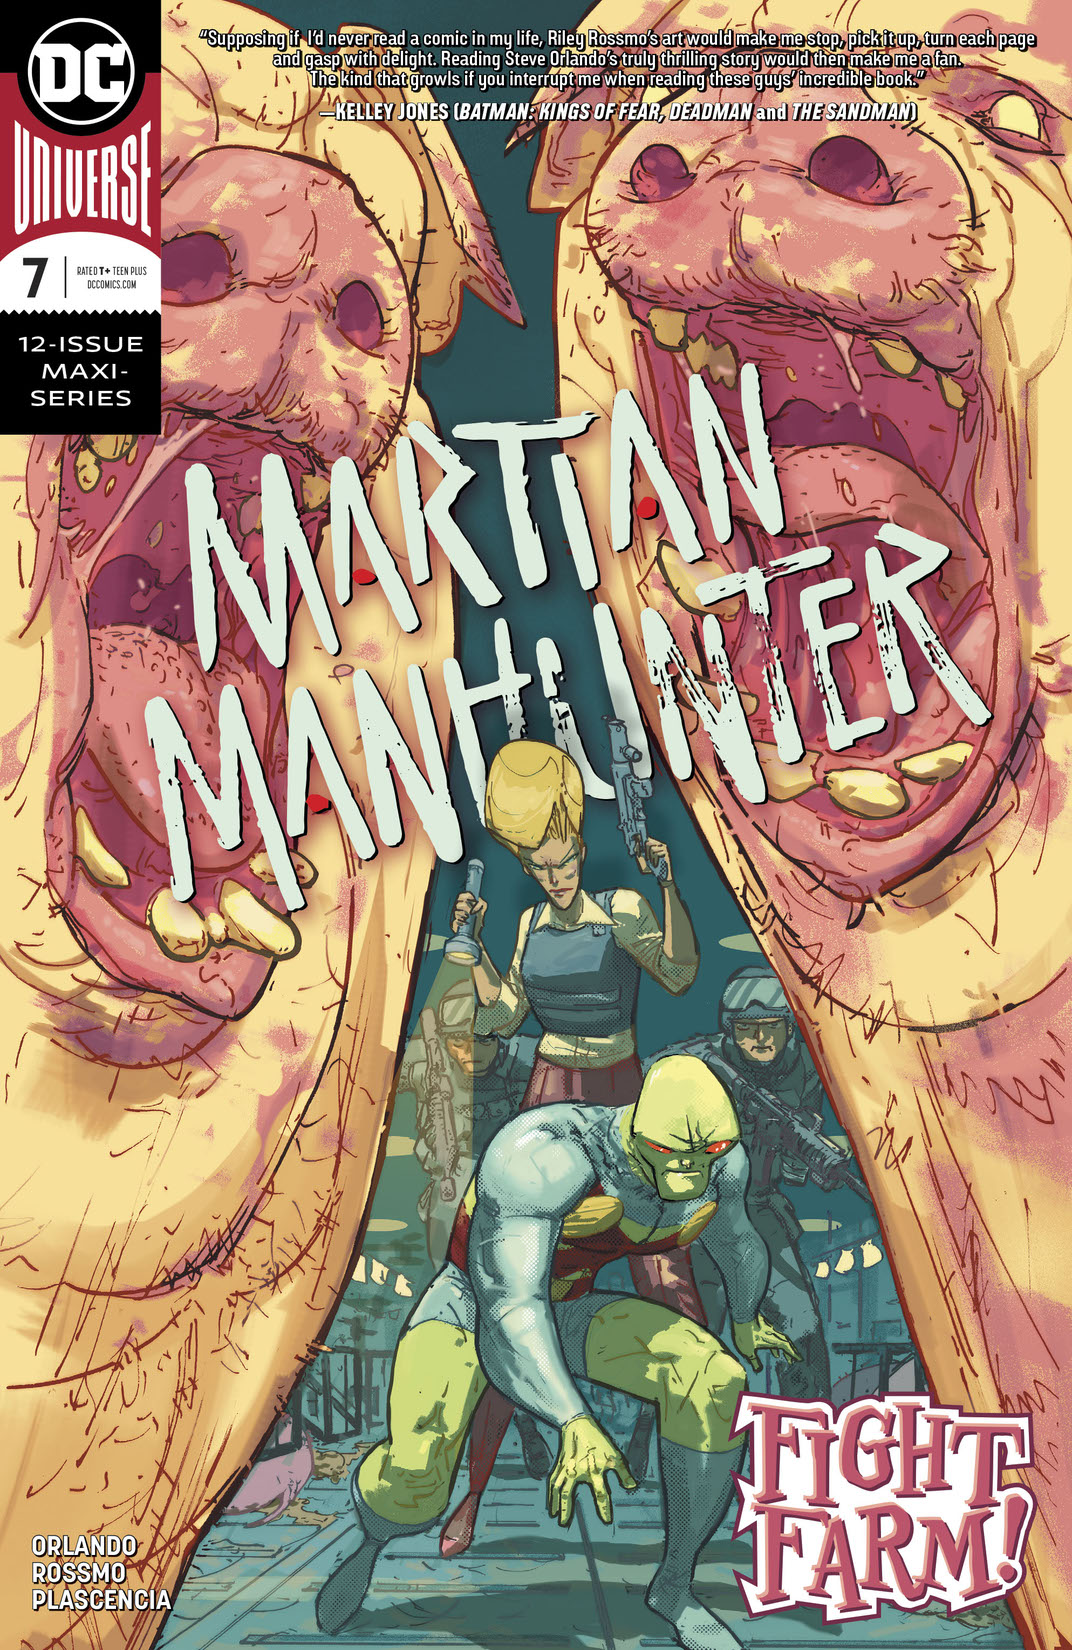 Martian Manhunter (2018-2020) #7 preview images